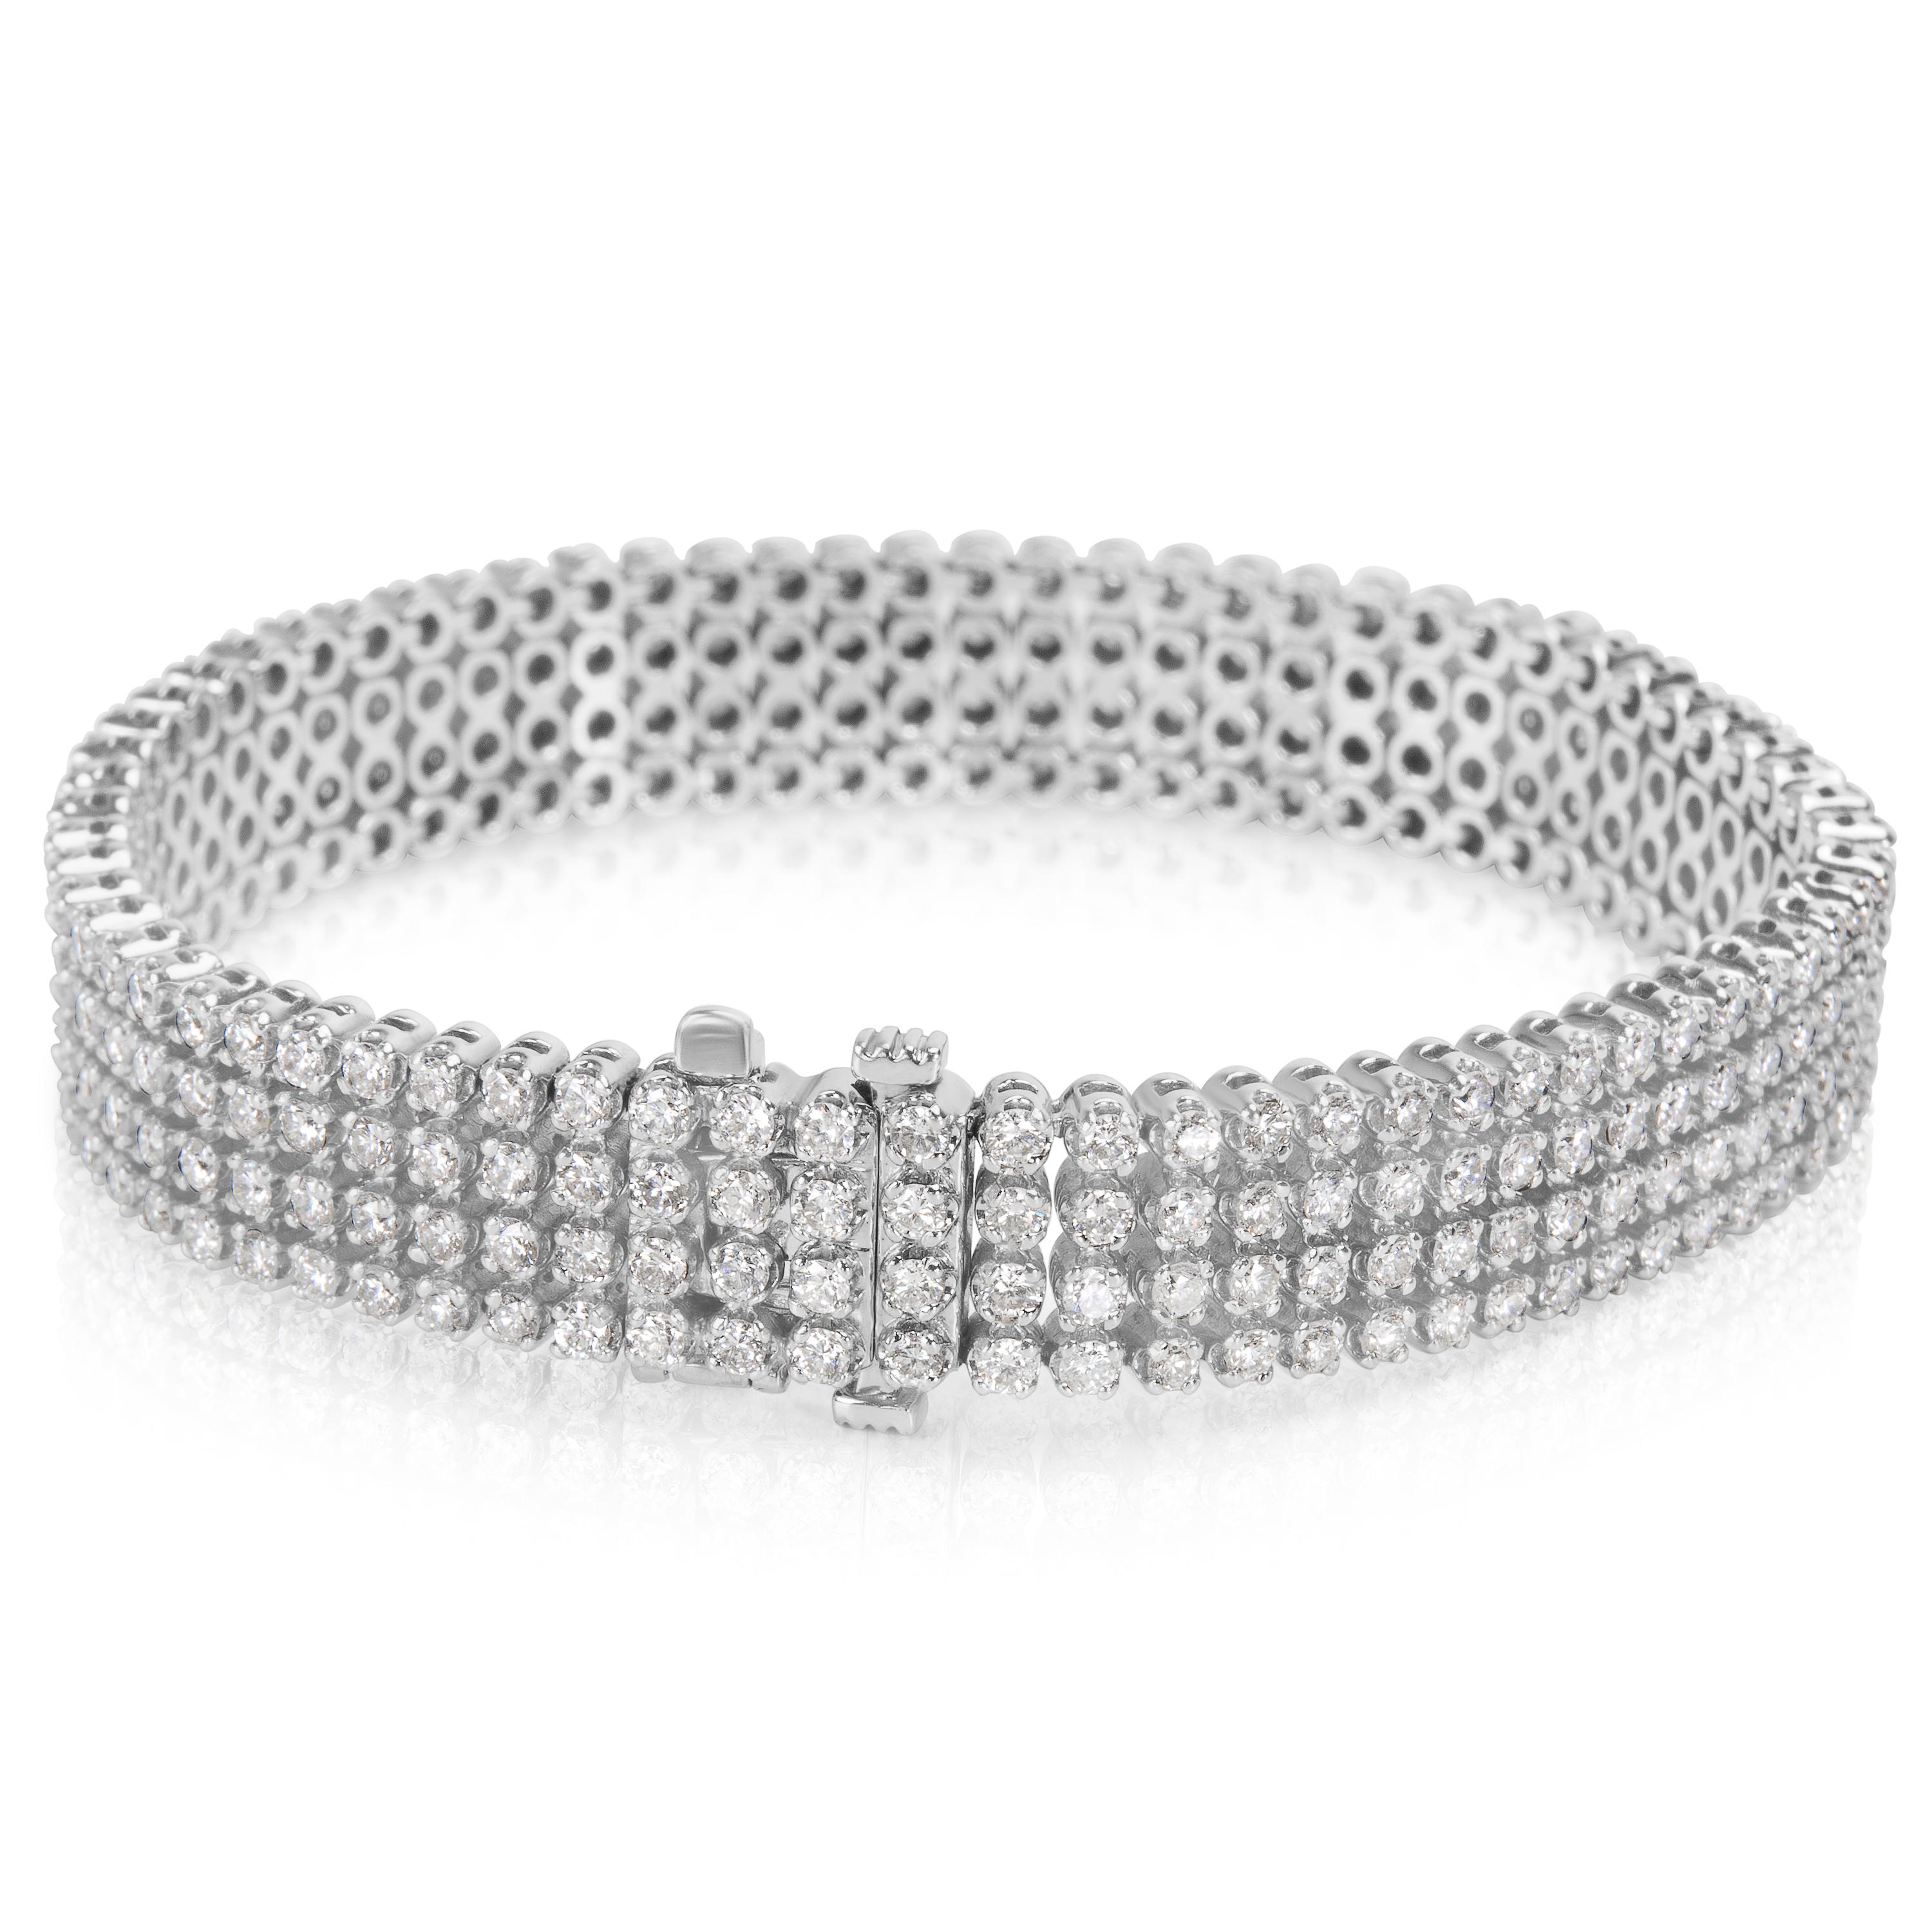 Est. retail price 12,425 USD. Brand new and unworn. Comes with IGL Certificate and presentation box. Bracelet length 7 inches.

Total diamond weight: 7.00 cts
Diamond shape: Round
Diamond color: F-G
Diamond clarity: VS
